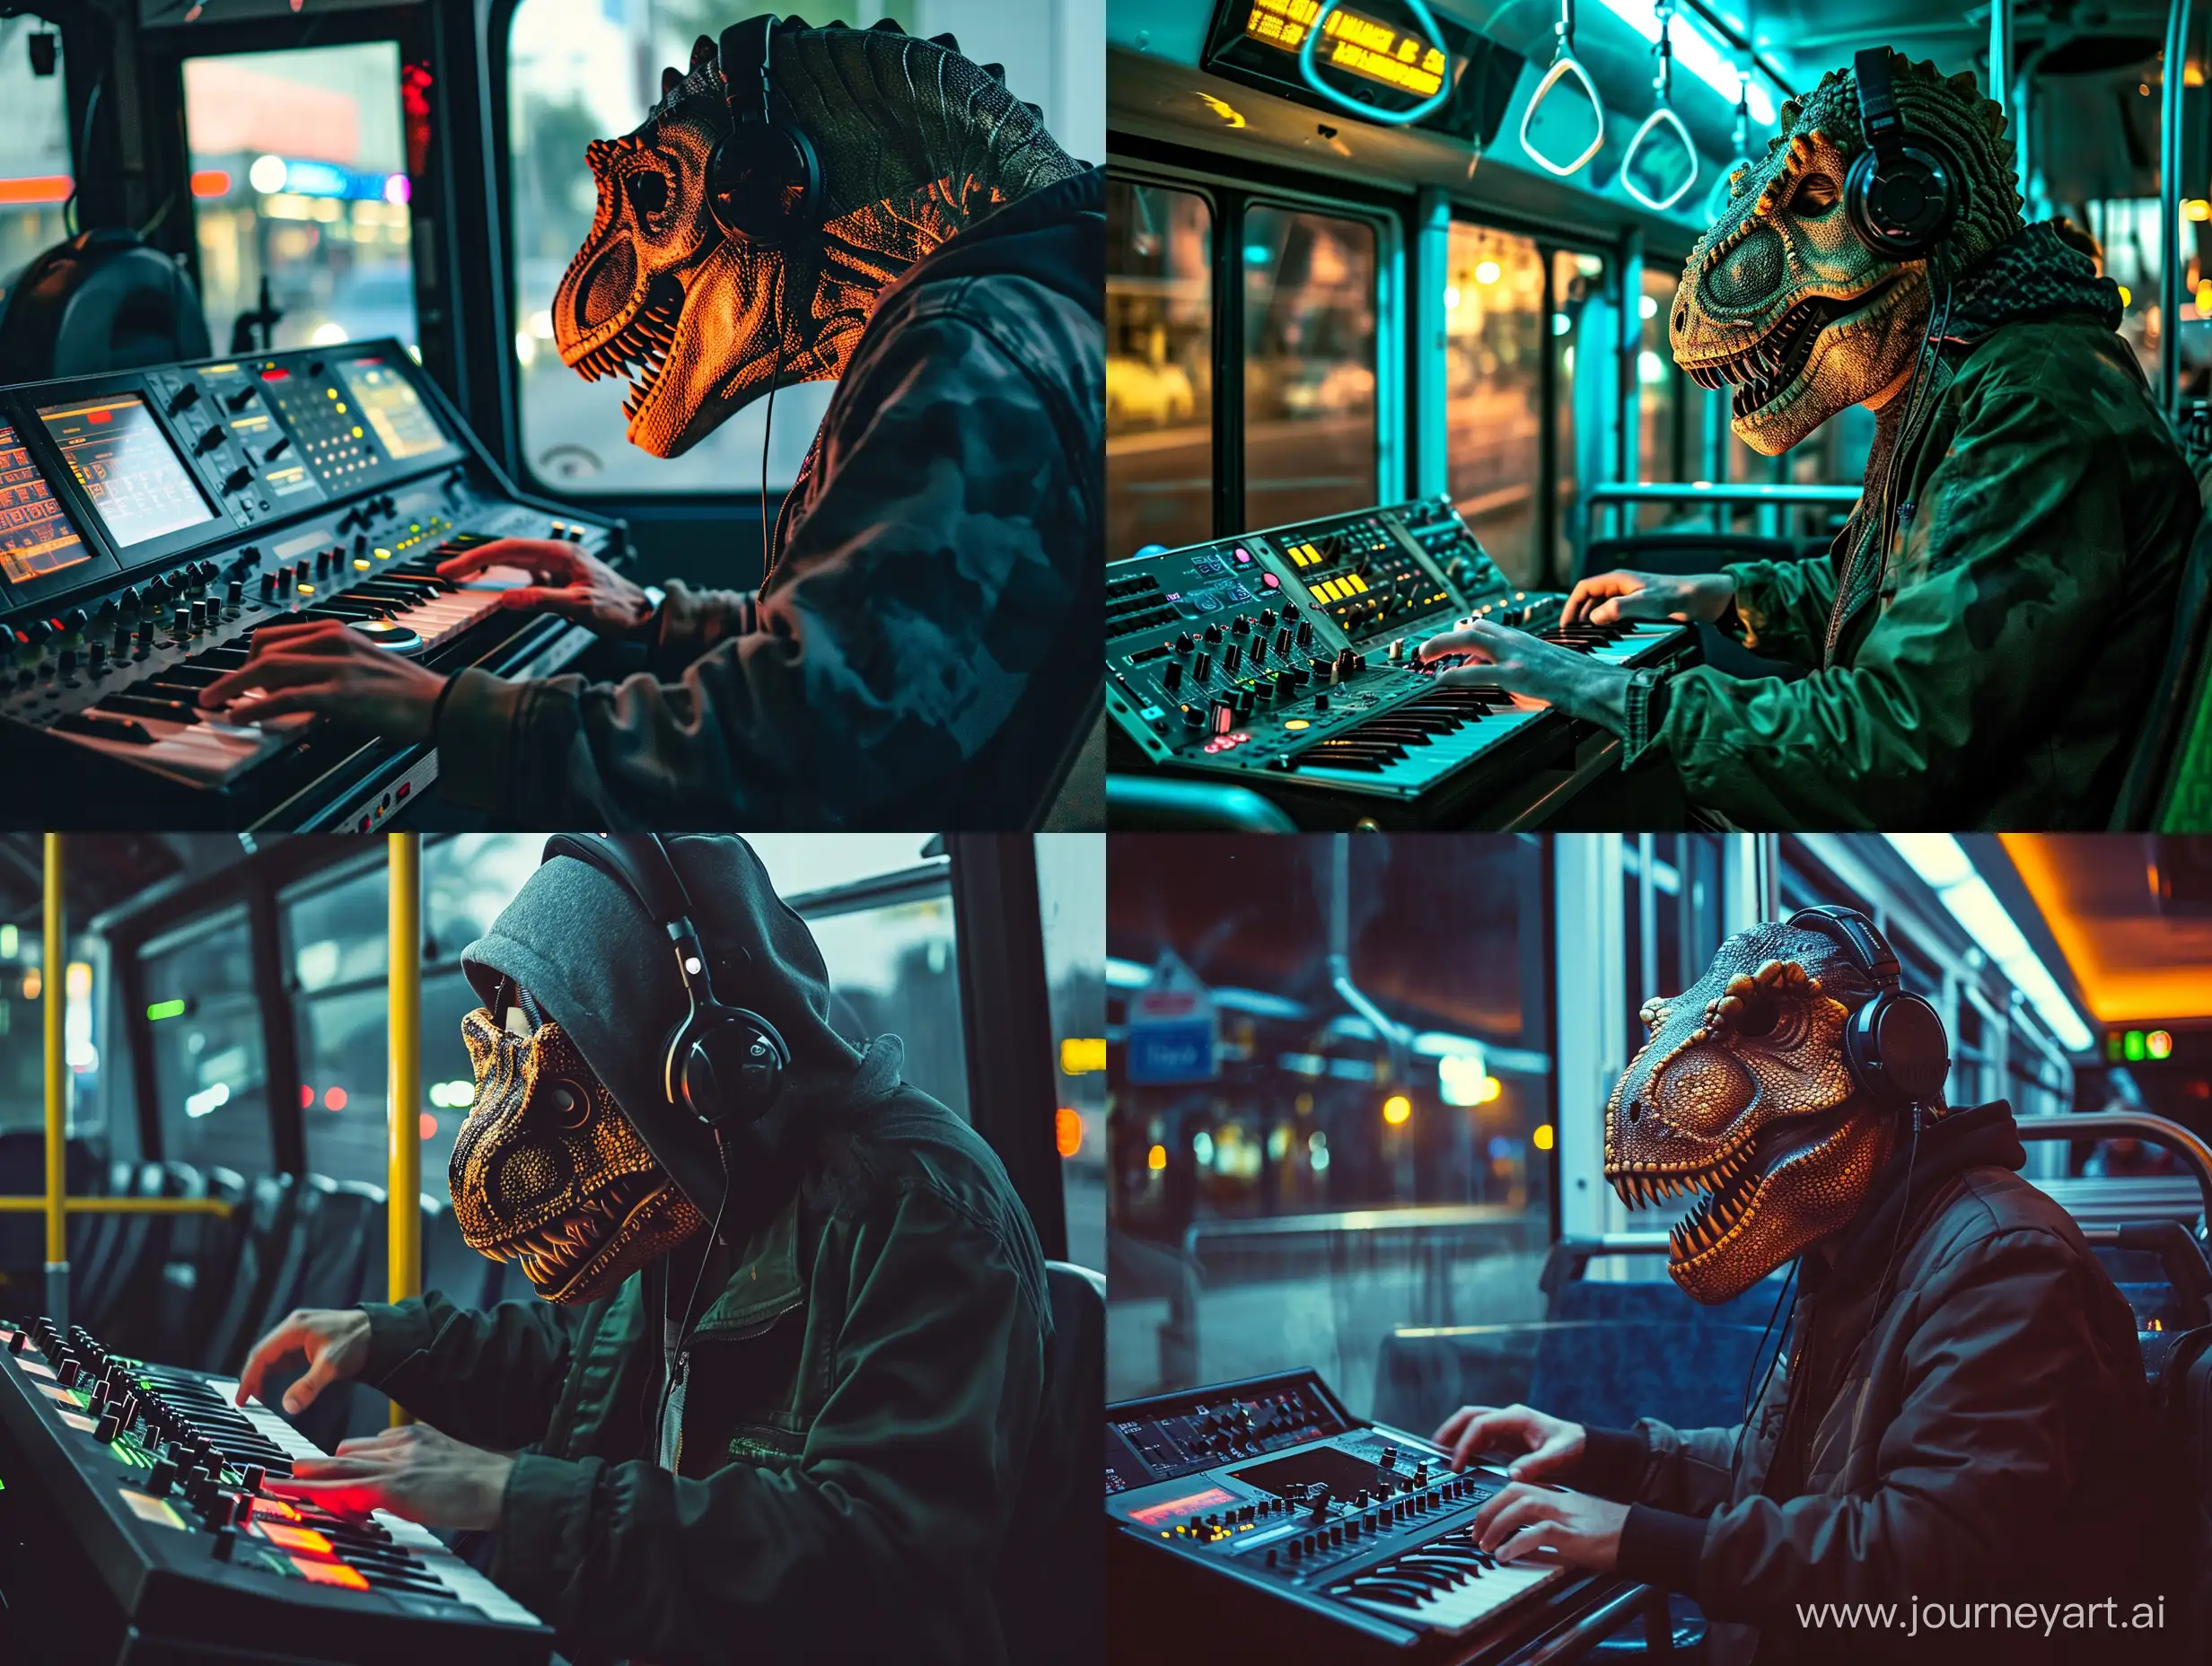 Urban-Beat-TRex-Masked-Music-Producer-in-Dramatic-8-Mile-Style